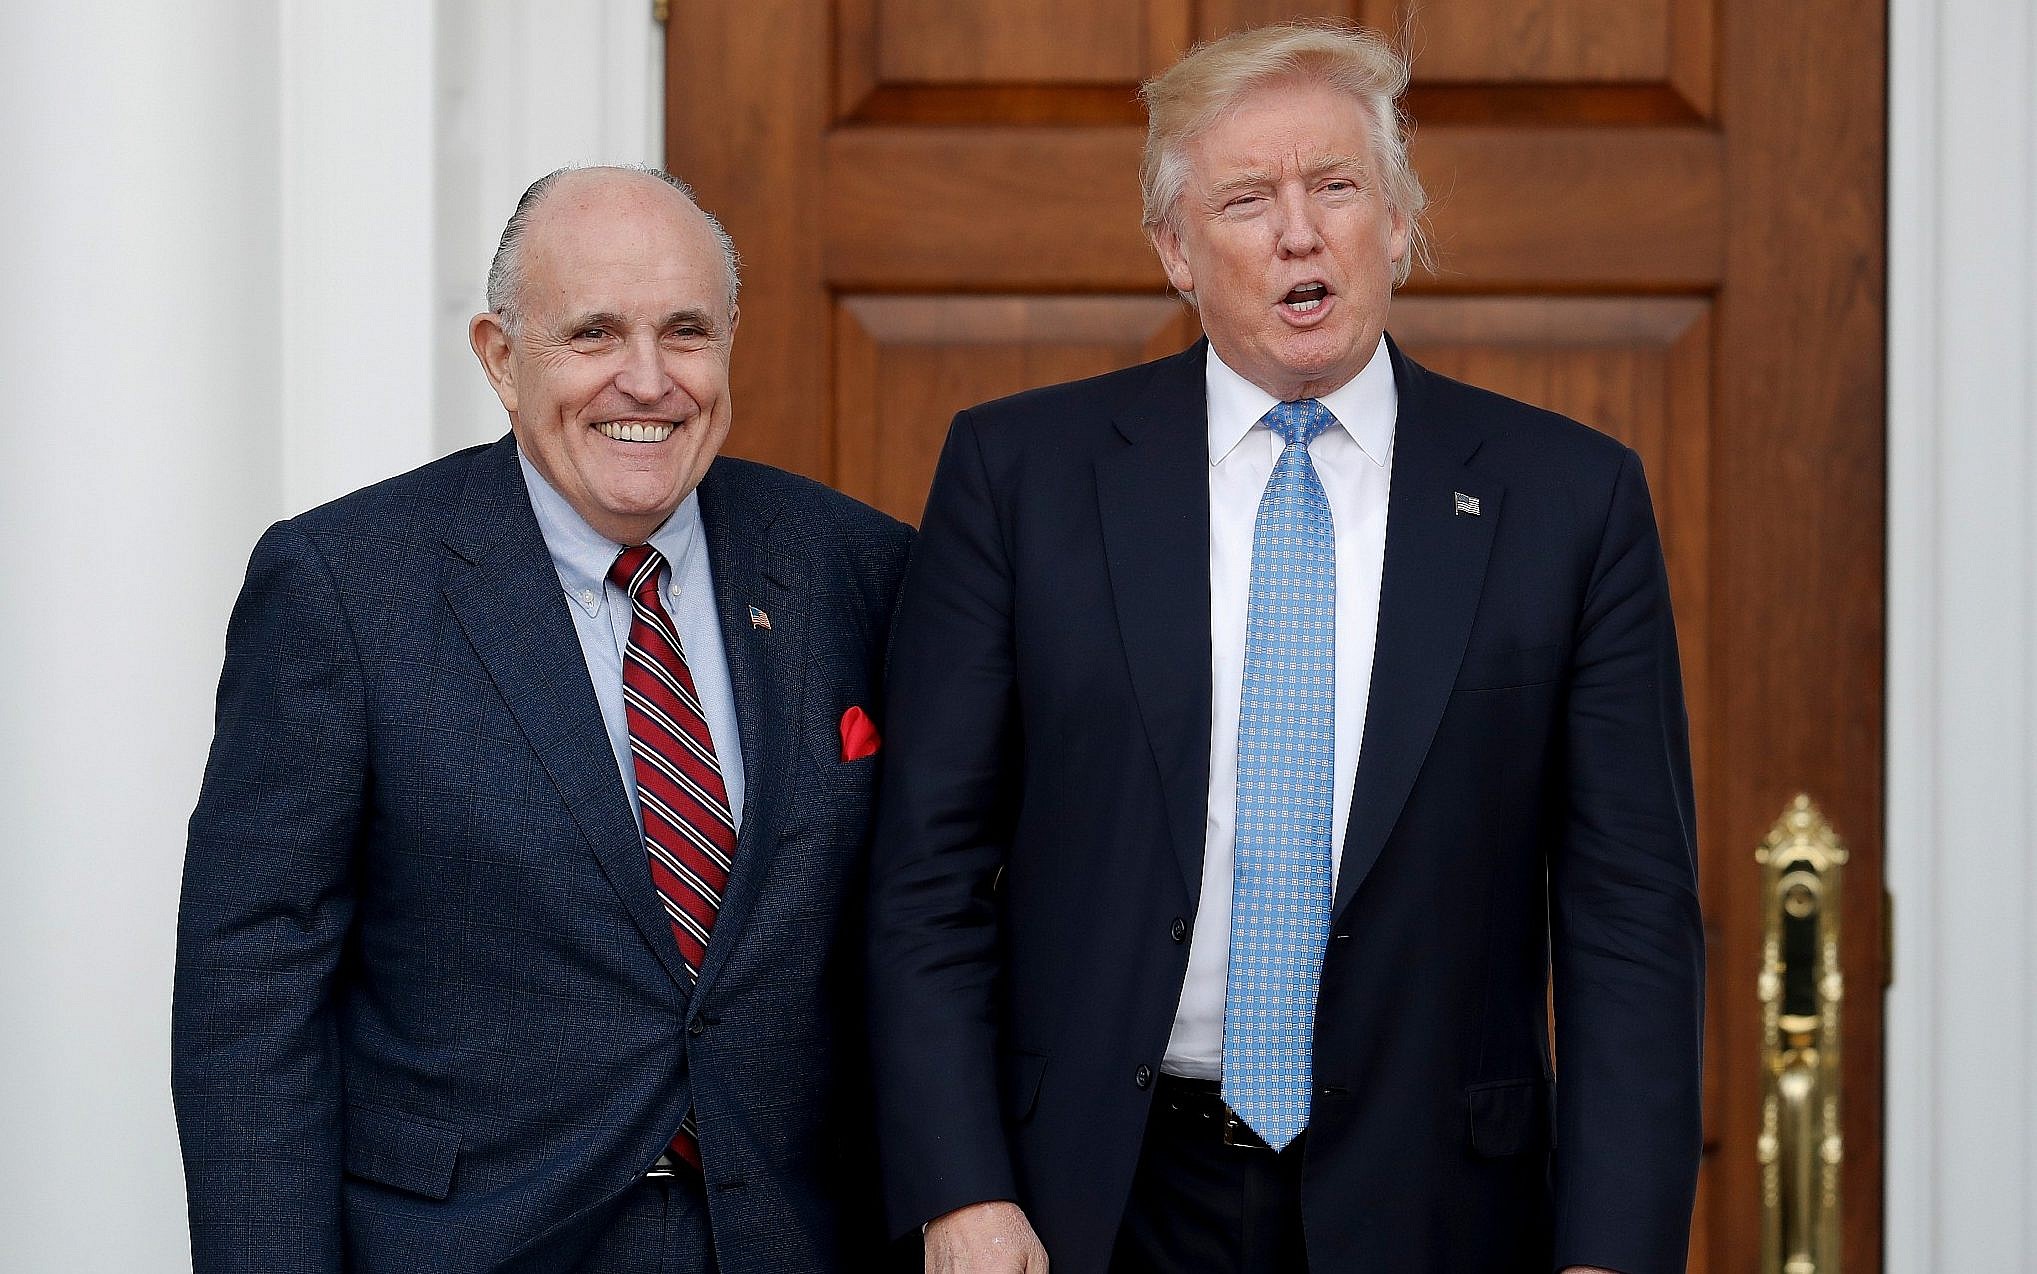 Youngest Porn Star 2016 - In 'stunning revelation,' Giuliani says Trump repaid Cohen ...